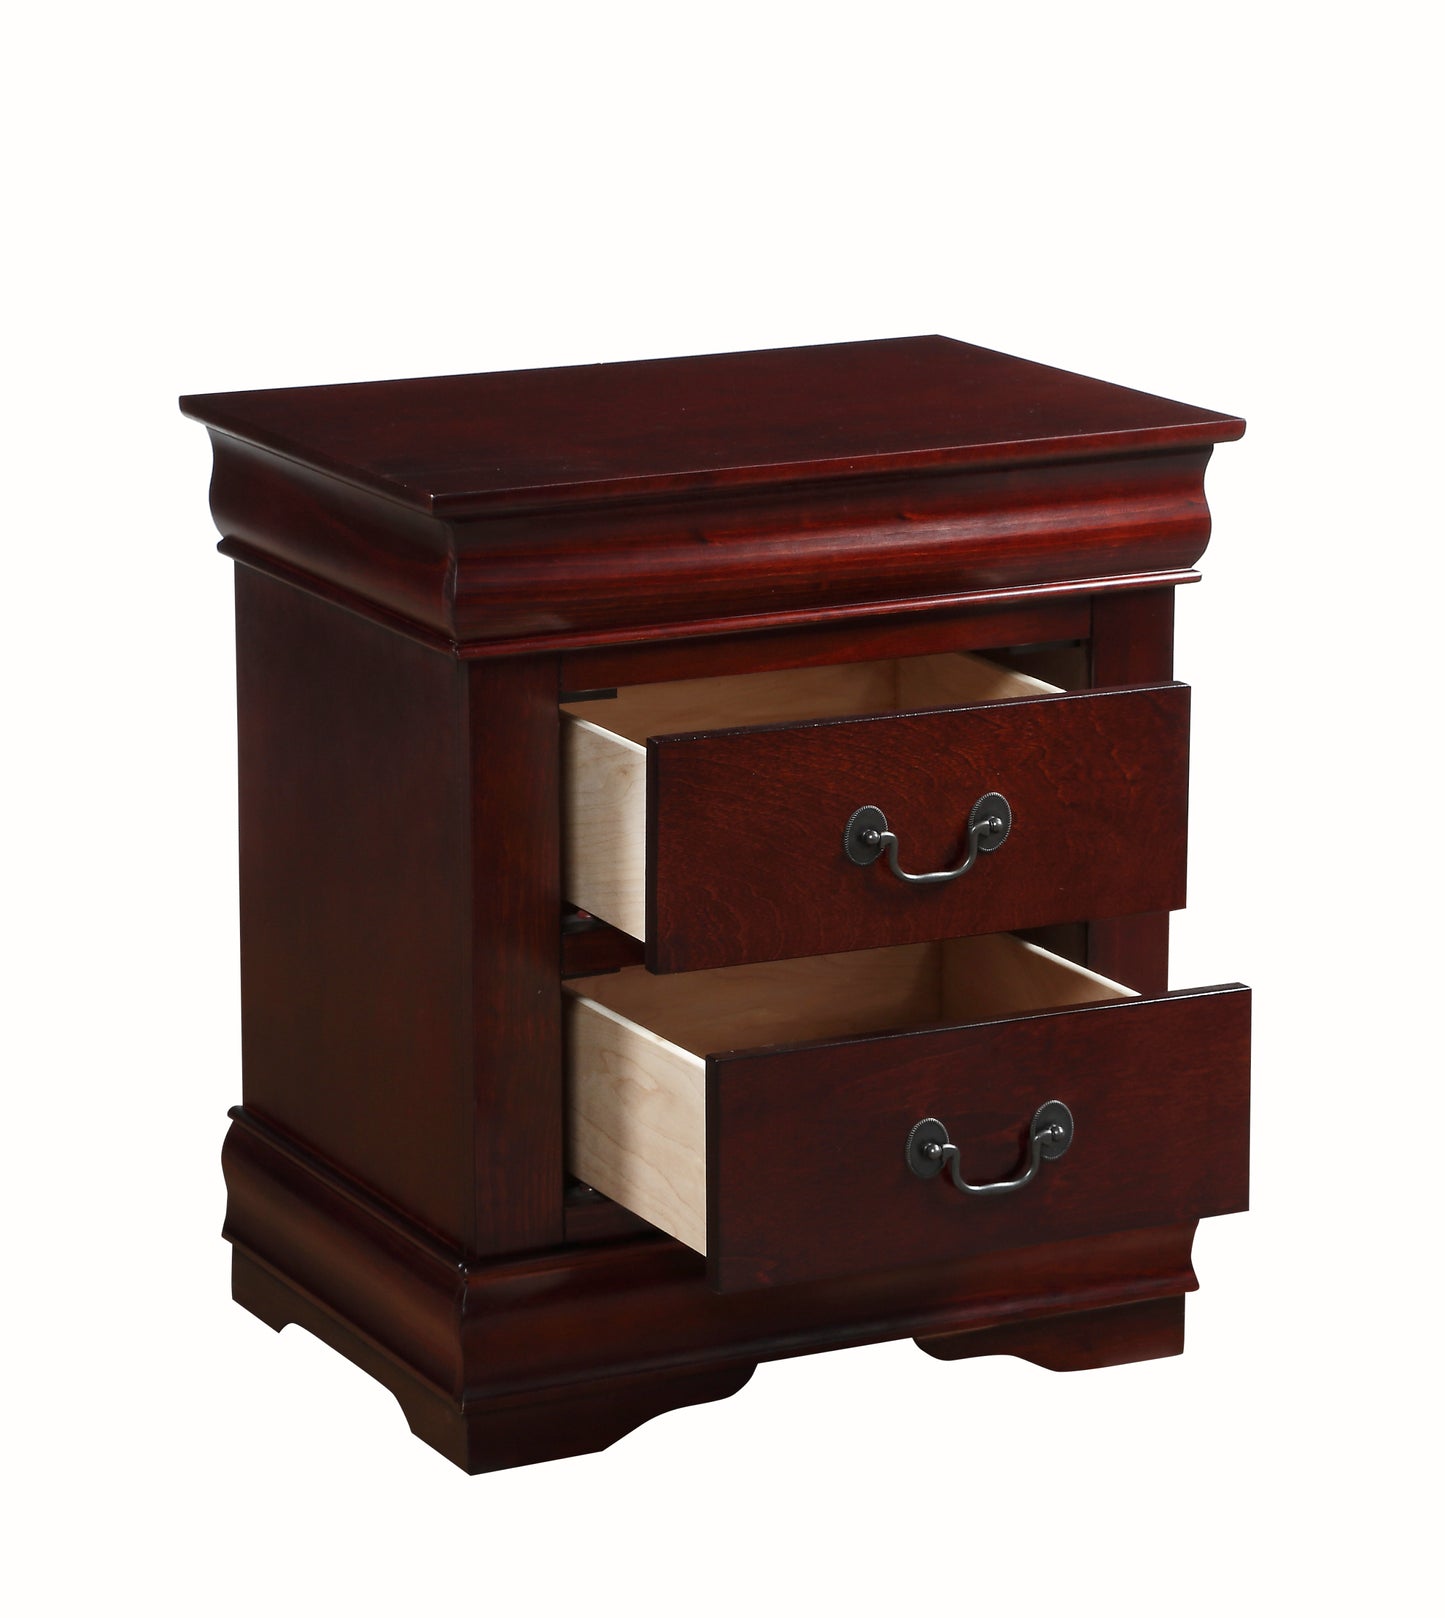 ACME Louis Philippe Nightstand in Cherry